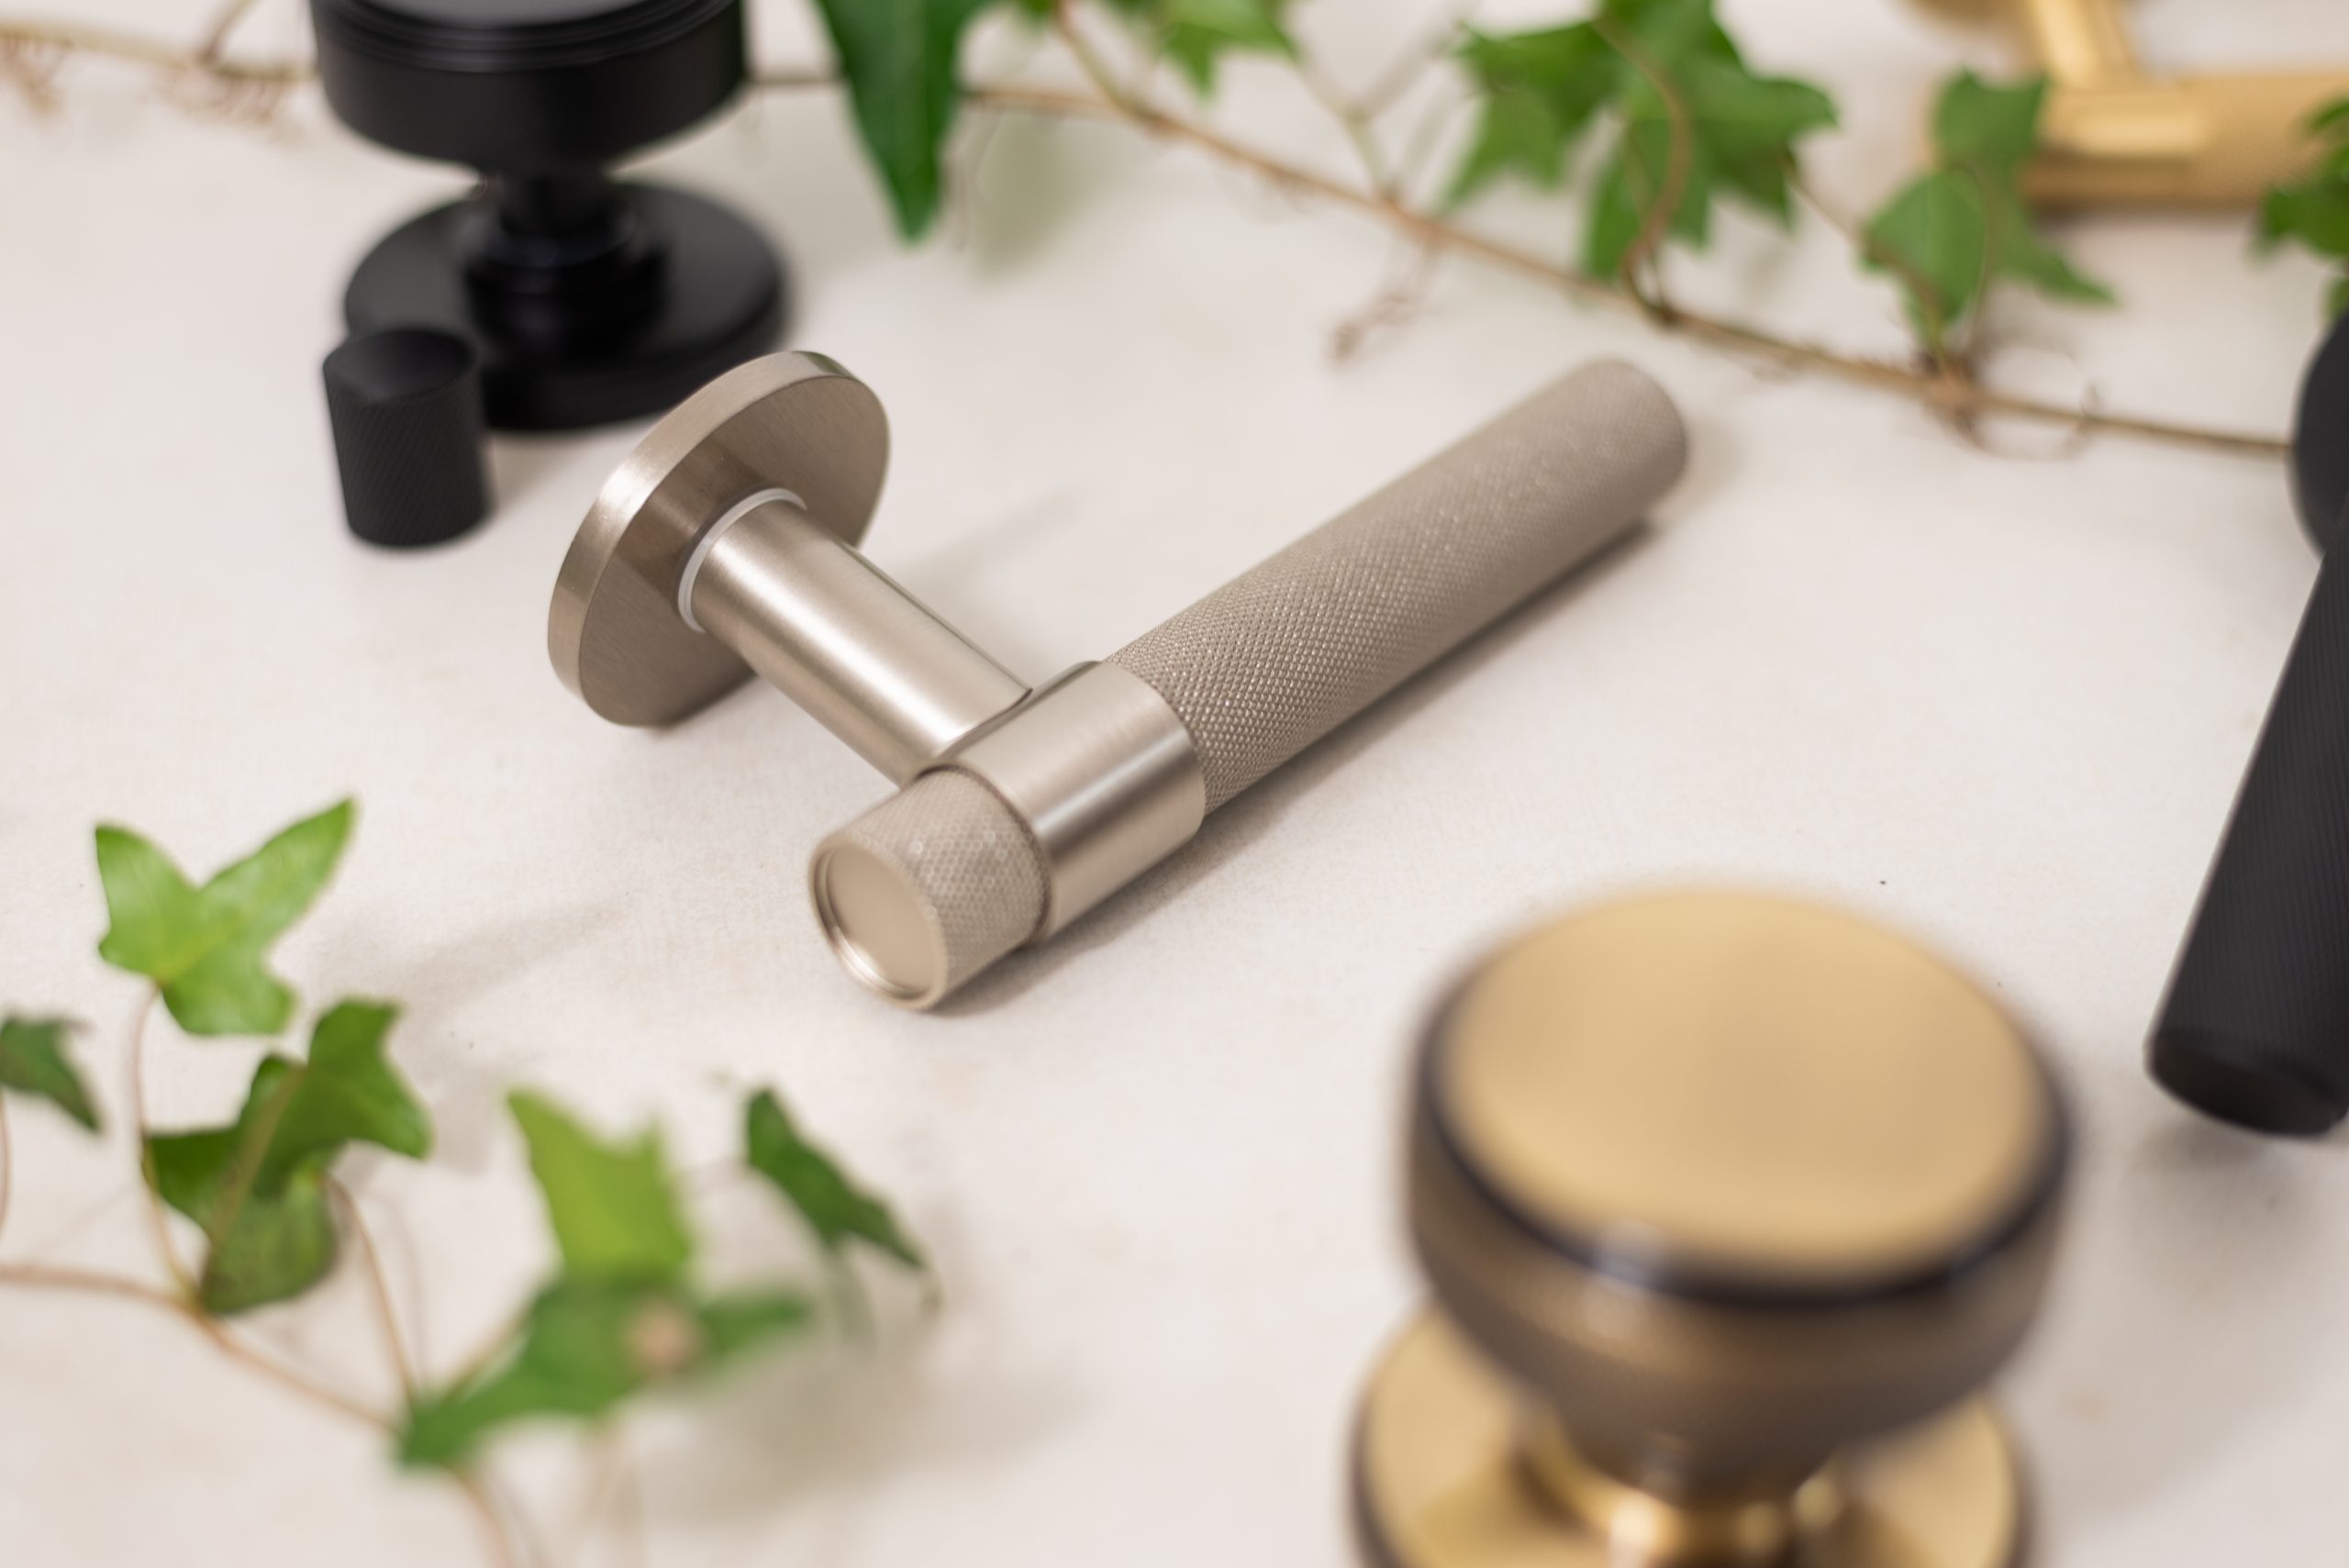 What are knurled handles?